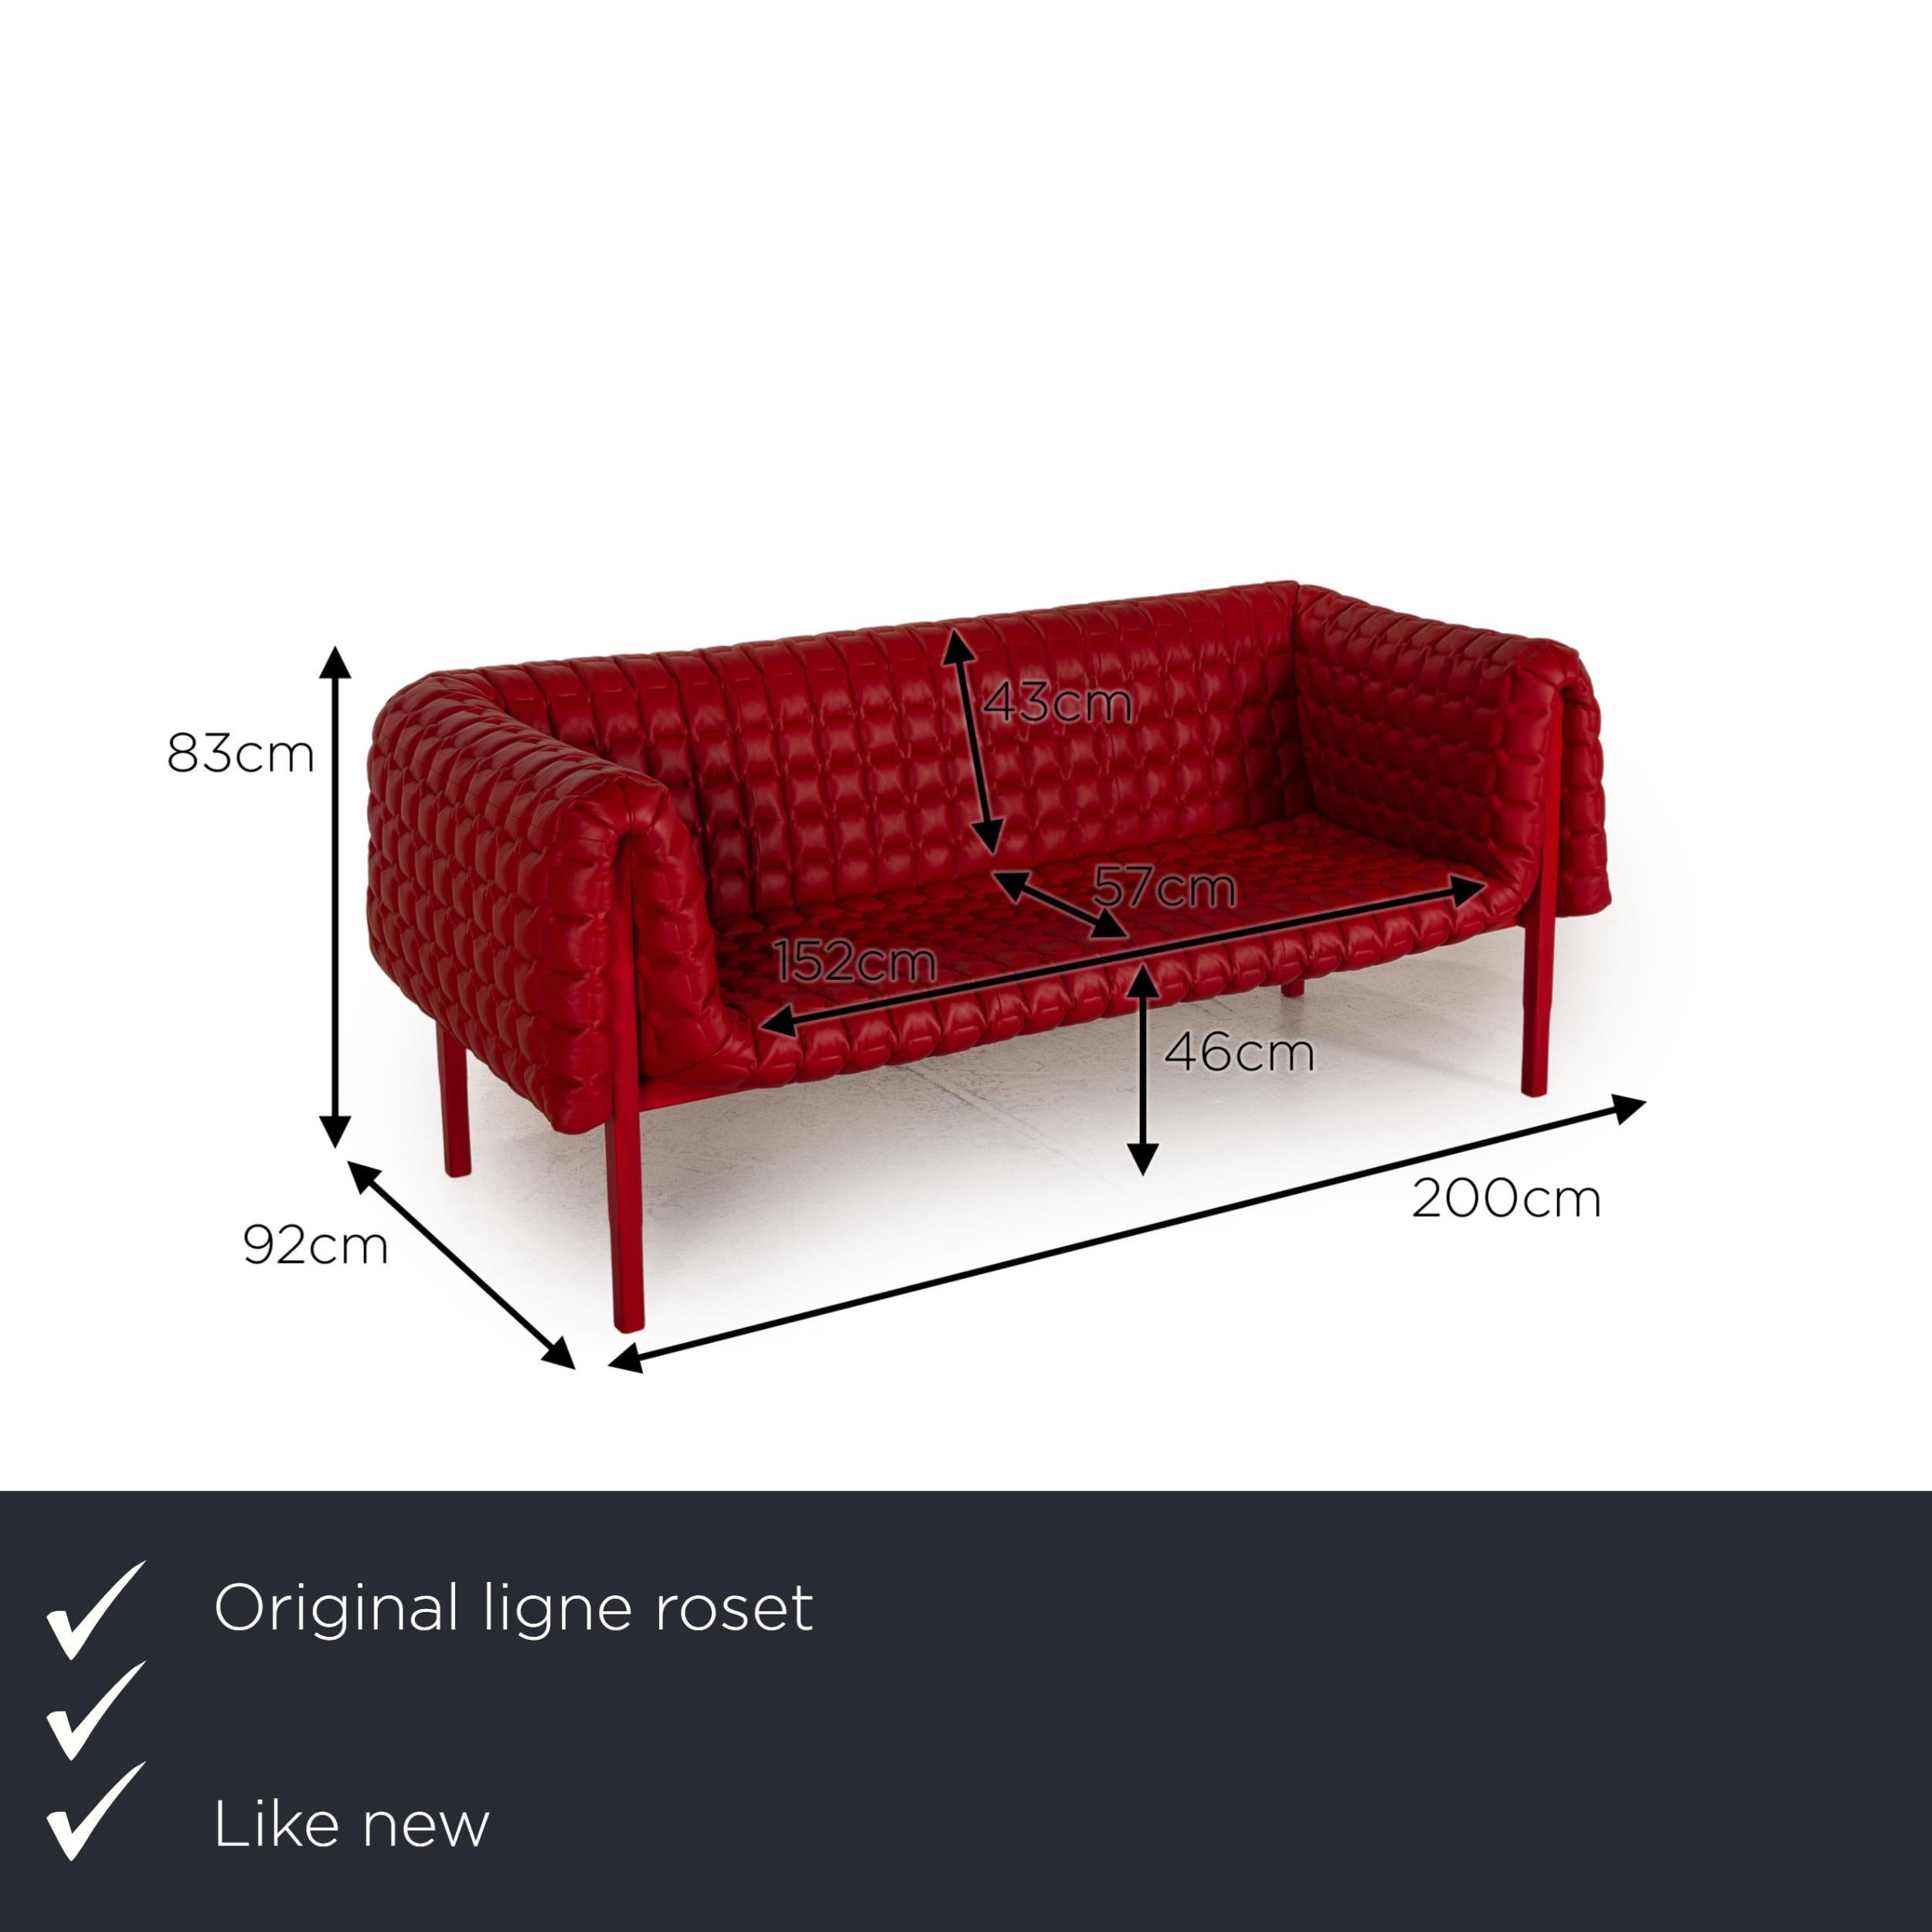 We present to you a ligne roset Ruché leather sofa red three-seater couch.
 

 Product measurements in centimeters:
 

Depth: 92
Width: 200
Height: 83
Seat height: 46
Rest height: 81
Seat depth: 57
Seat width: 152
Back height: 43.
 